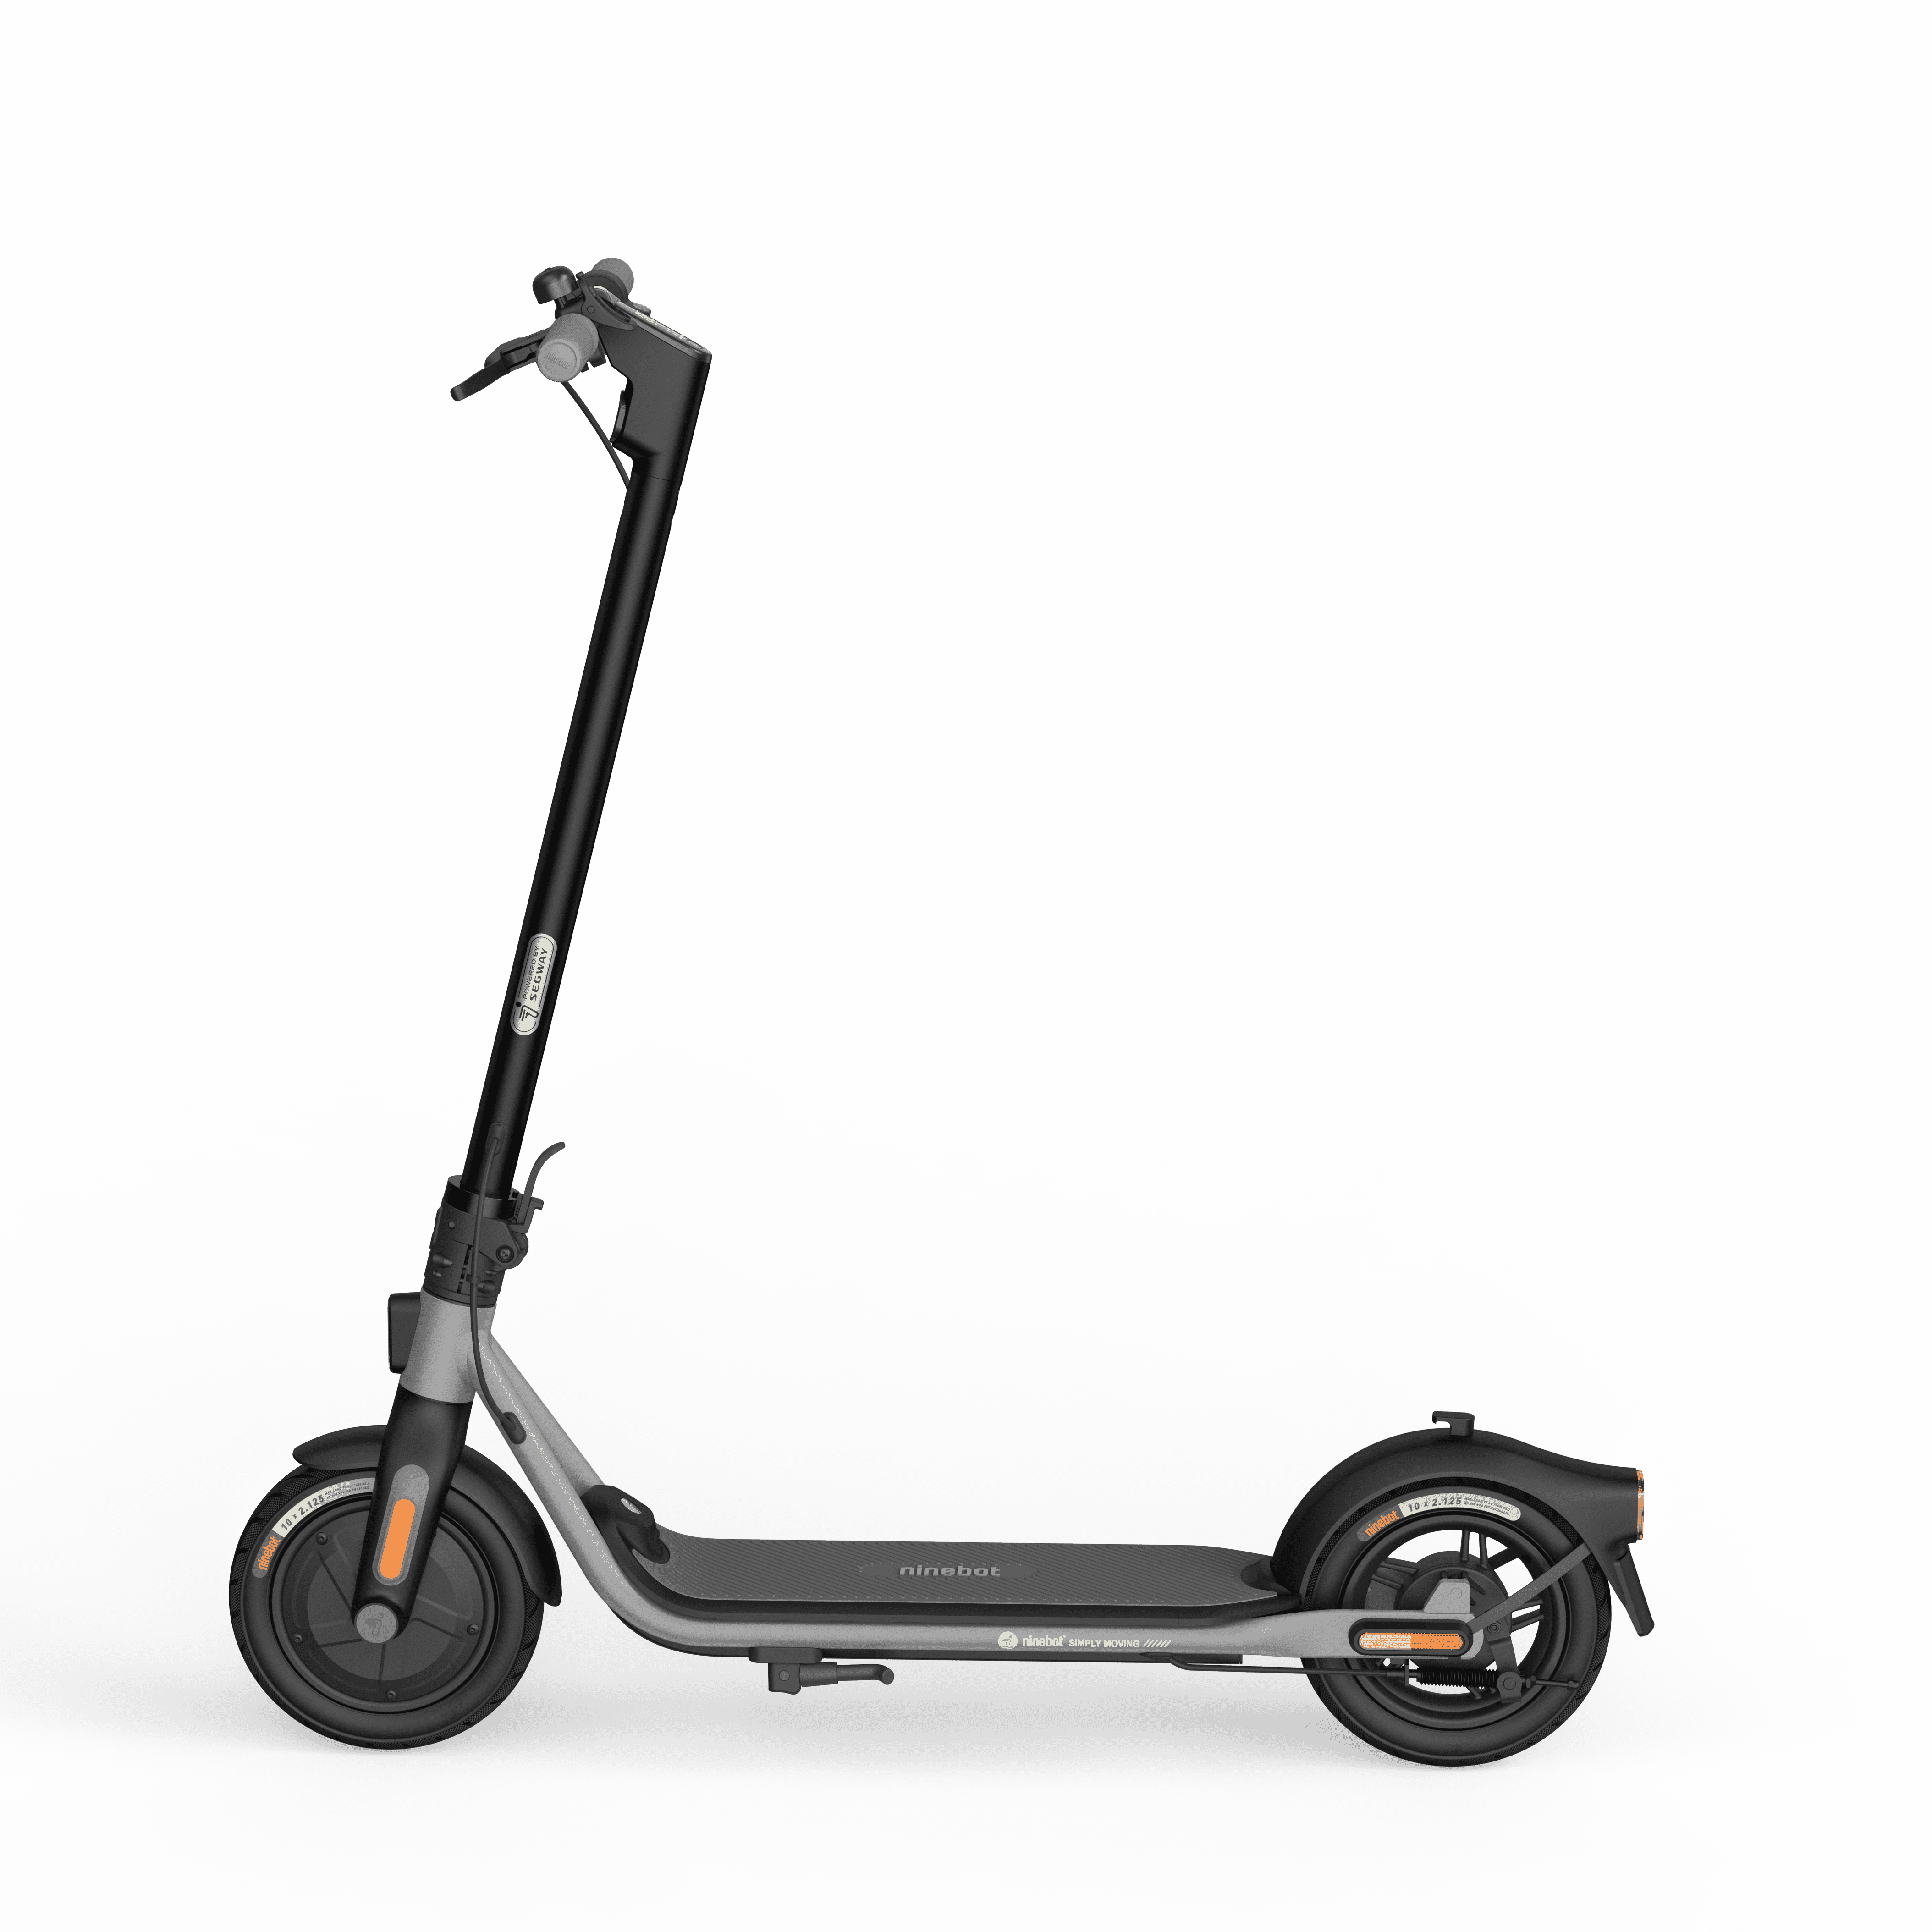 Segway Electric Scooter, 11.2 Miles Range, 15.5 mph, Fast Charging Battery, Upgraded Motor Power, 10-inch pneumatic tires, Lightweight Foldable. Safe & Comfortable - Walmart.com